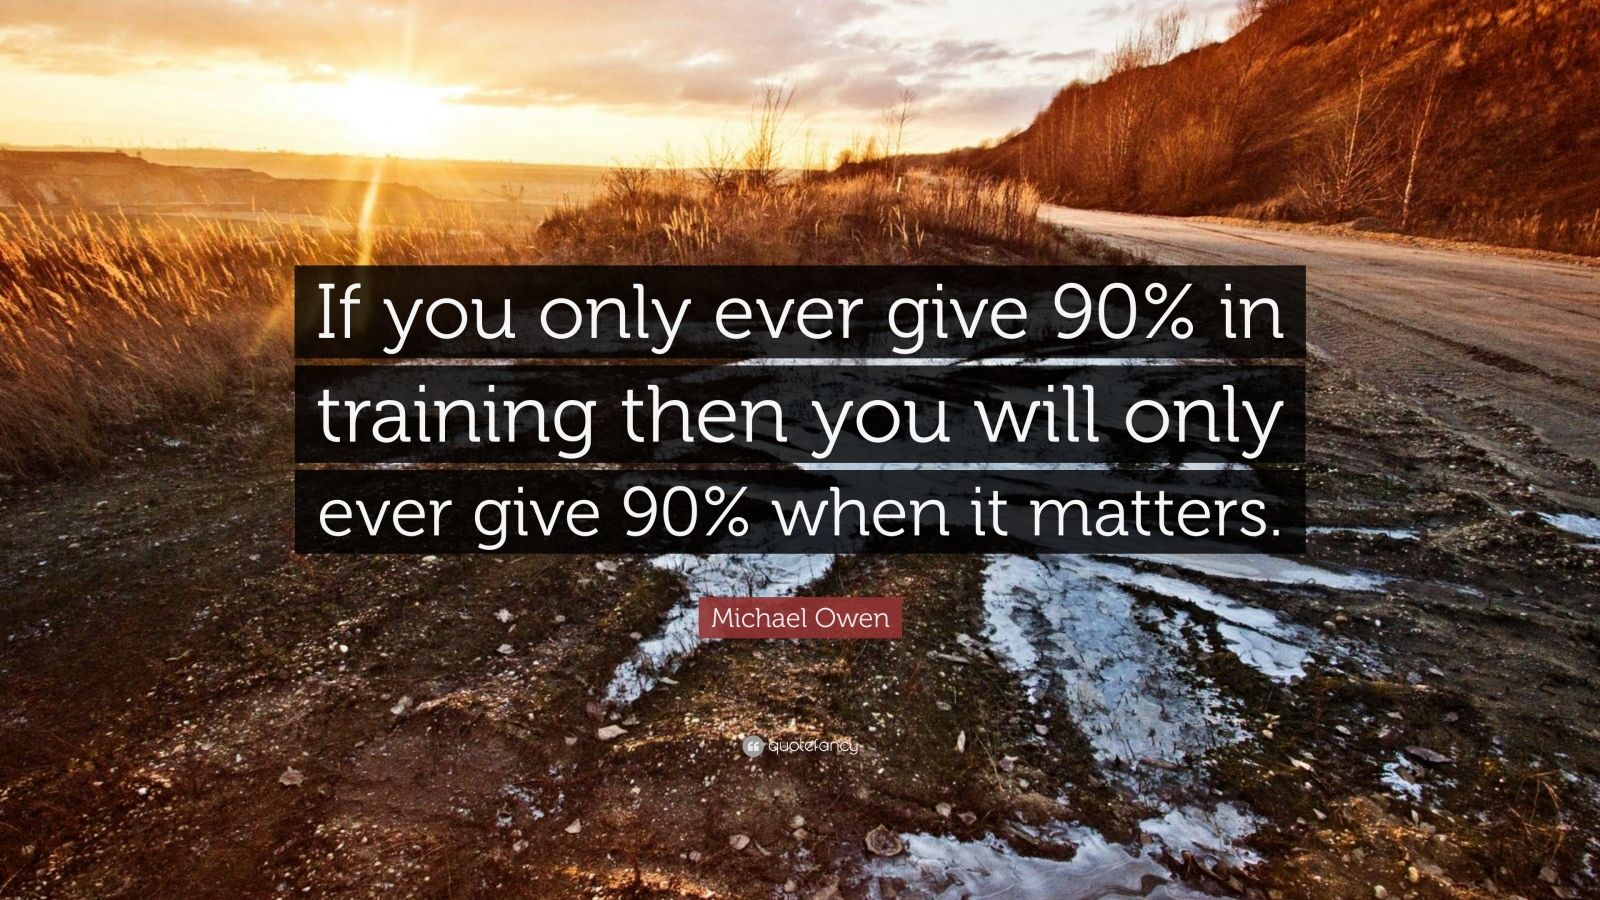 Michael Owen Quote: “If you only ever give 90% in training then you